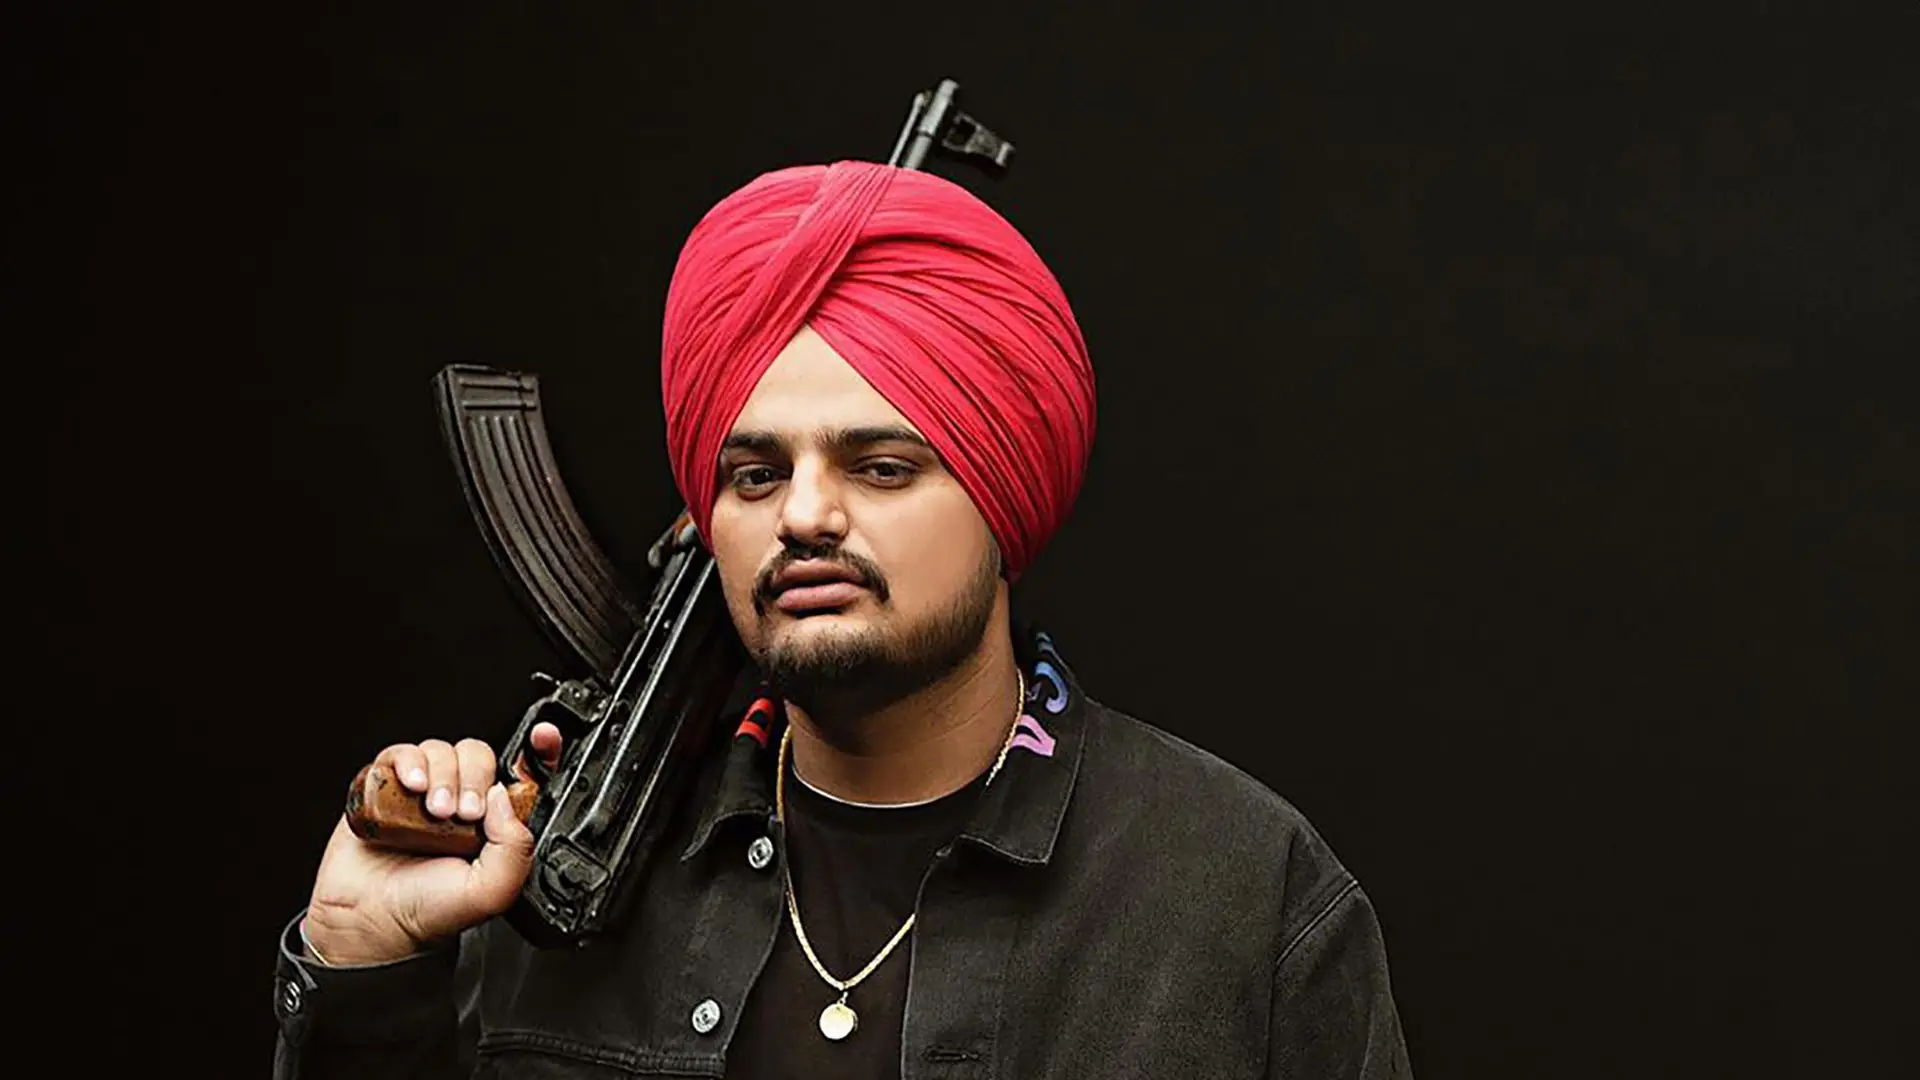 Indian Rapper Sidhu Moose Wala Shot And Killed Near His Home, Yours Truly, News, January 30, 2023